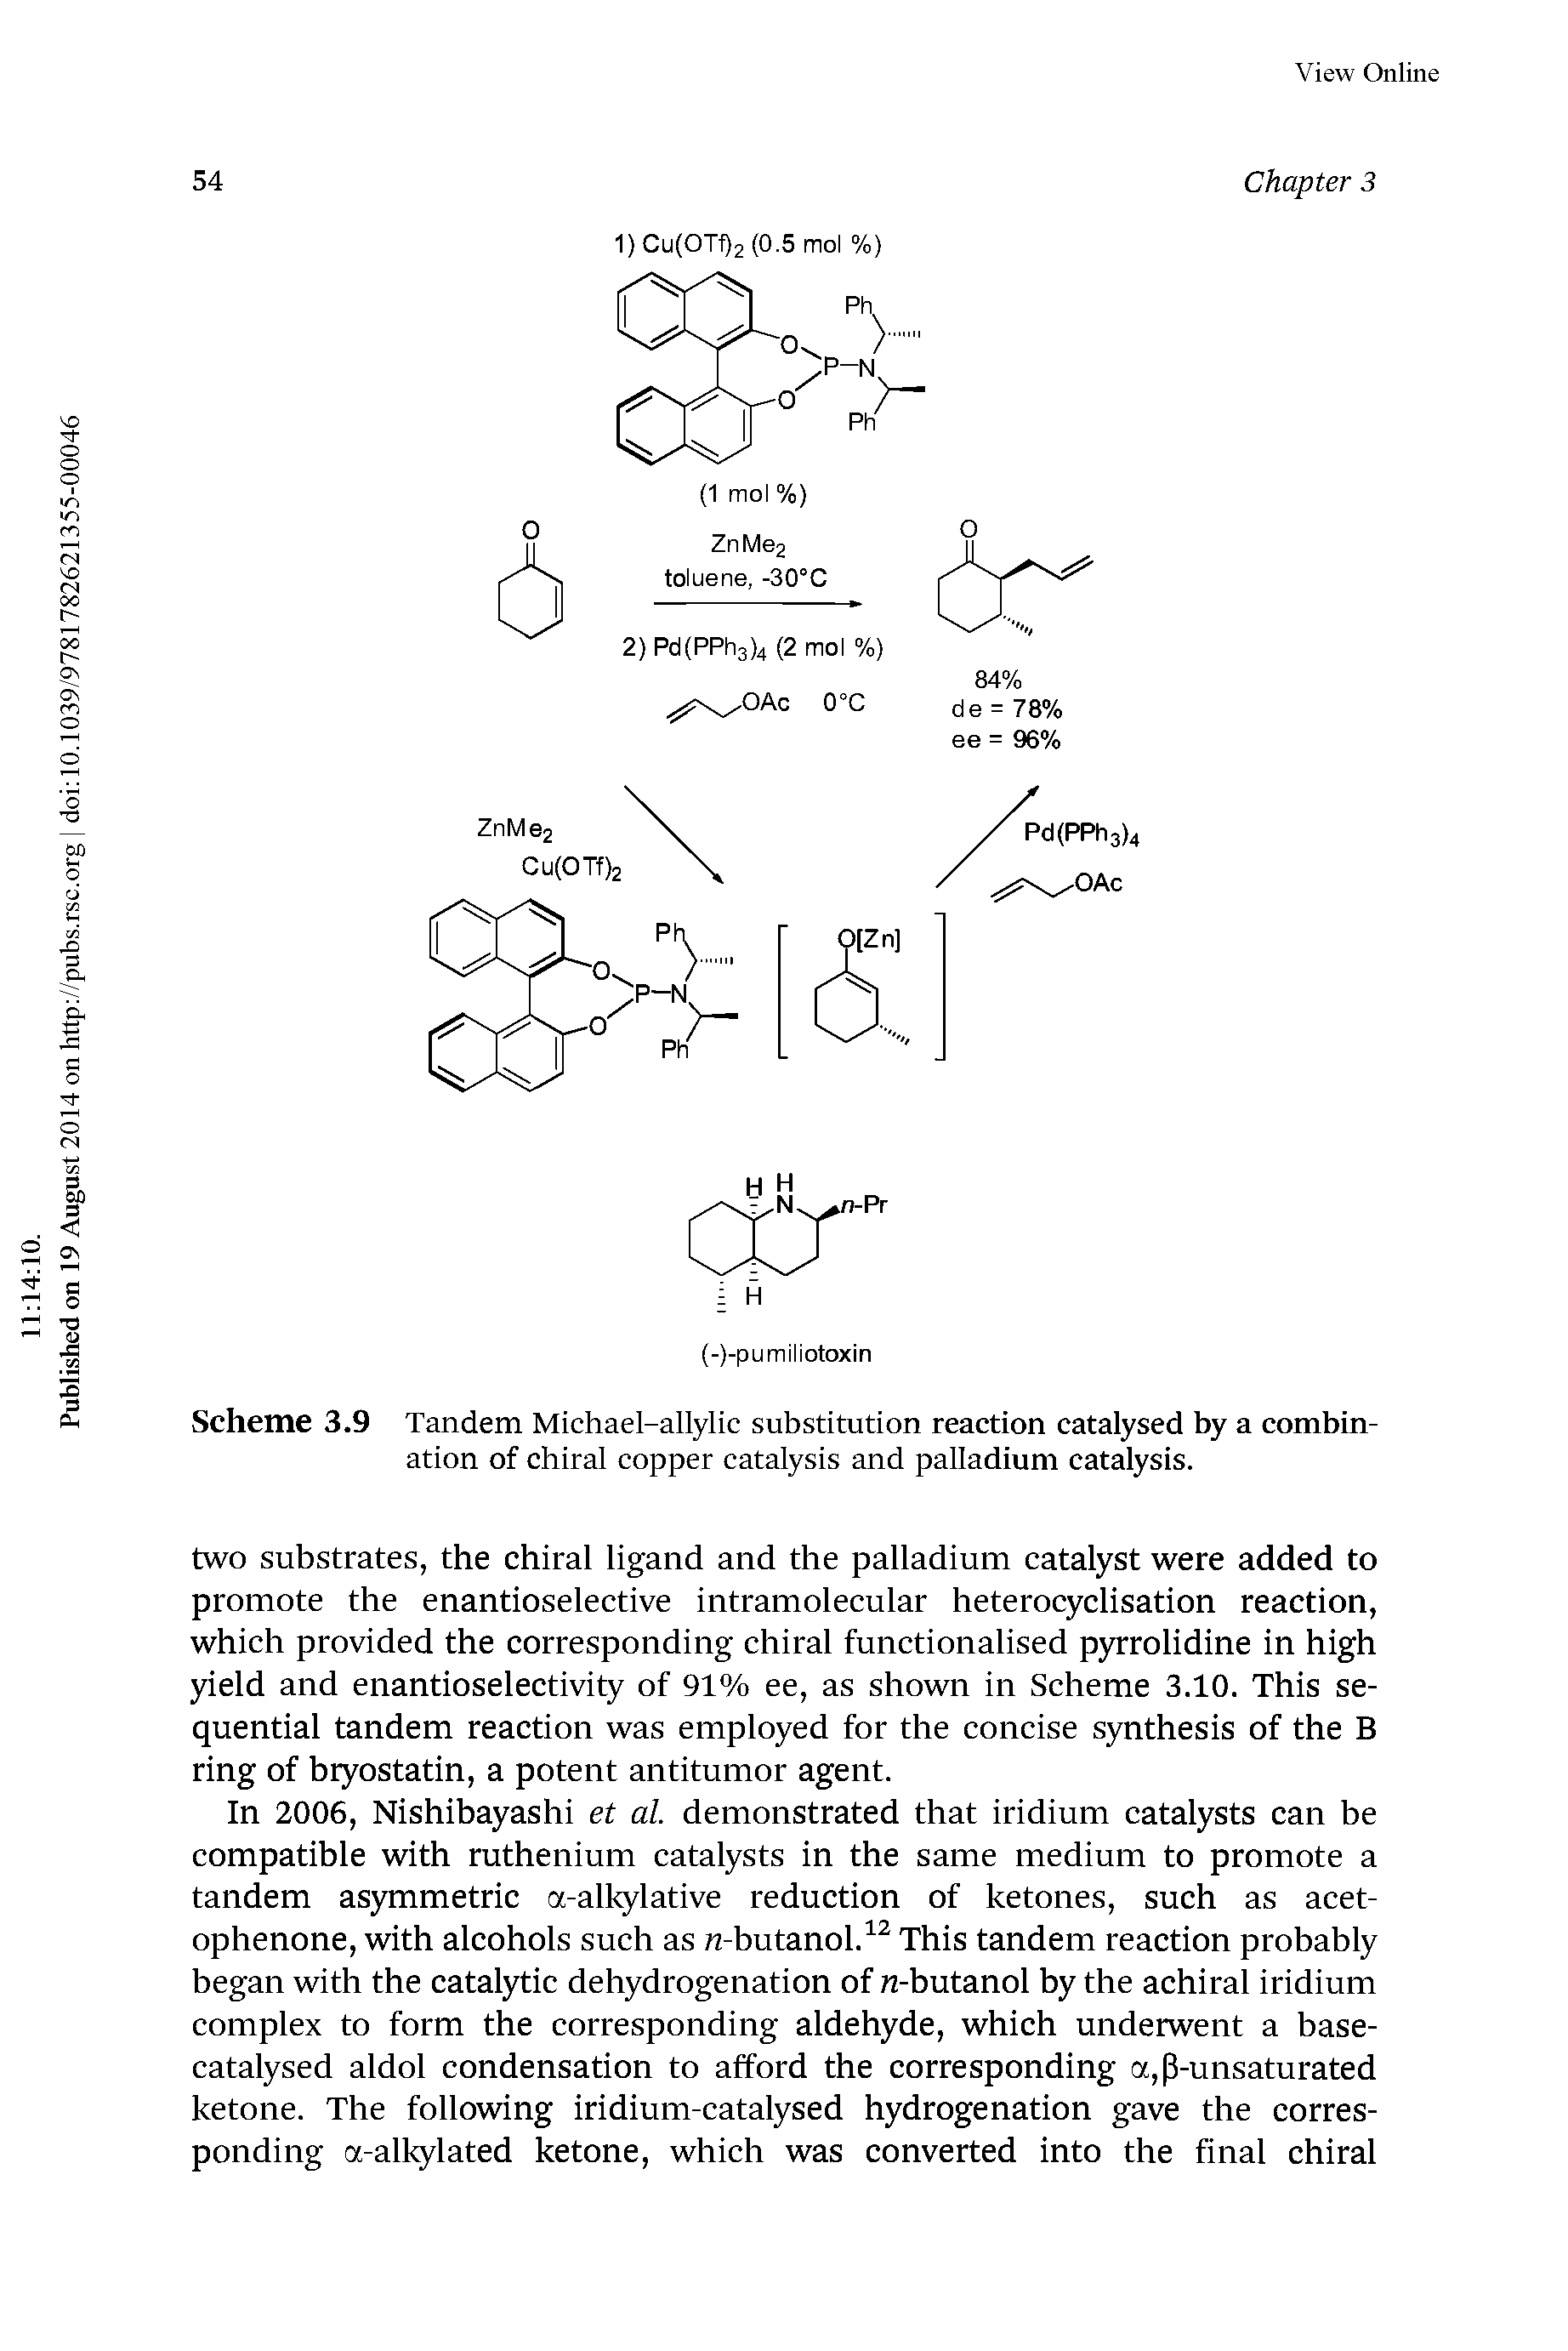 Scheme 3.9 Tandem Michael-allylic substitution reaction catalysed by a combination of chiral copper catalysis and palladium catalysis.